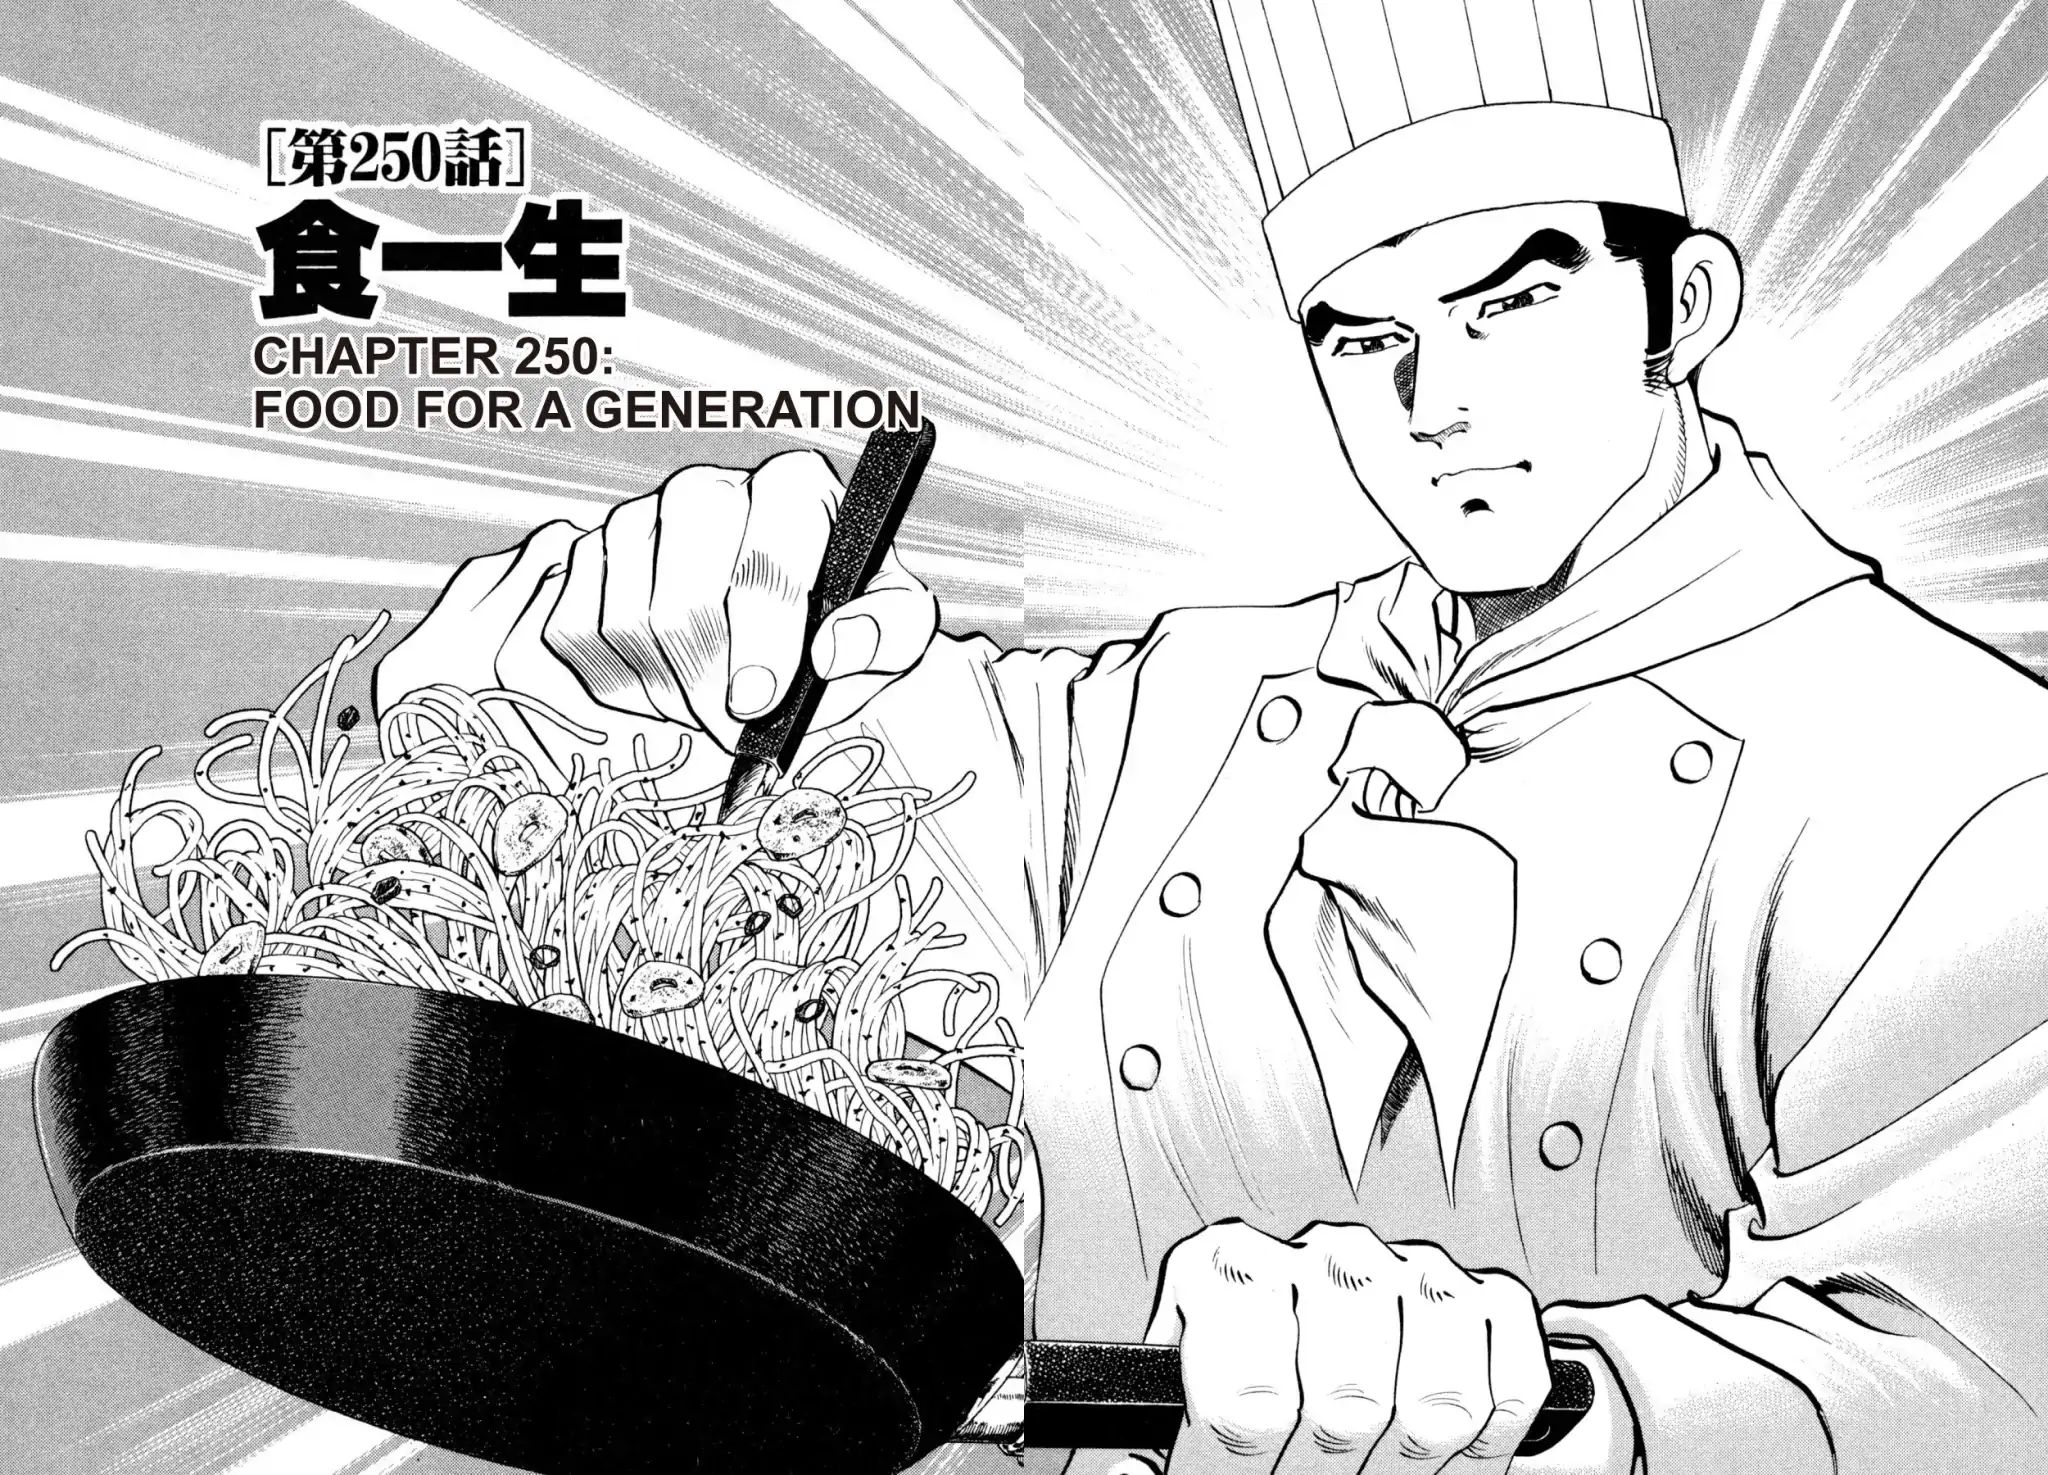 Shoku King VOL.27 CHAPTER 250: FOOD FOR A GENERATION